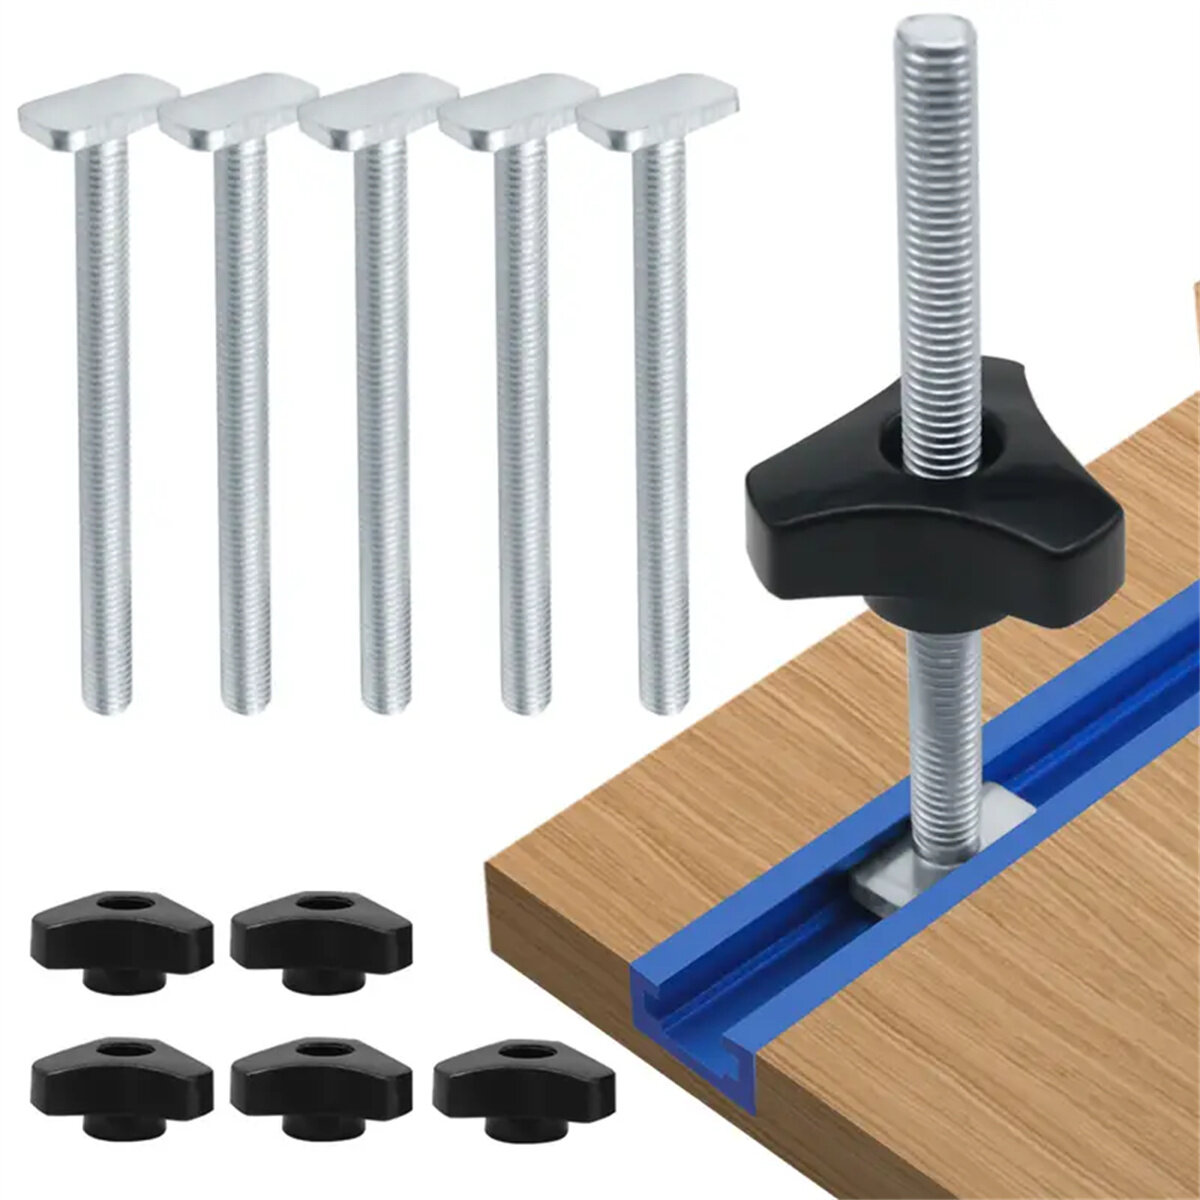 

5 Pack T Bolt Knob Kit Miter Track Sliding Nut Woodworking Tool Jigs Screw Fixture For Workbench T-Slot Suitable Use Wit